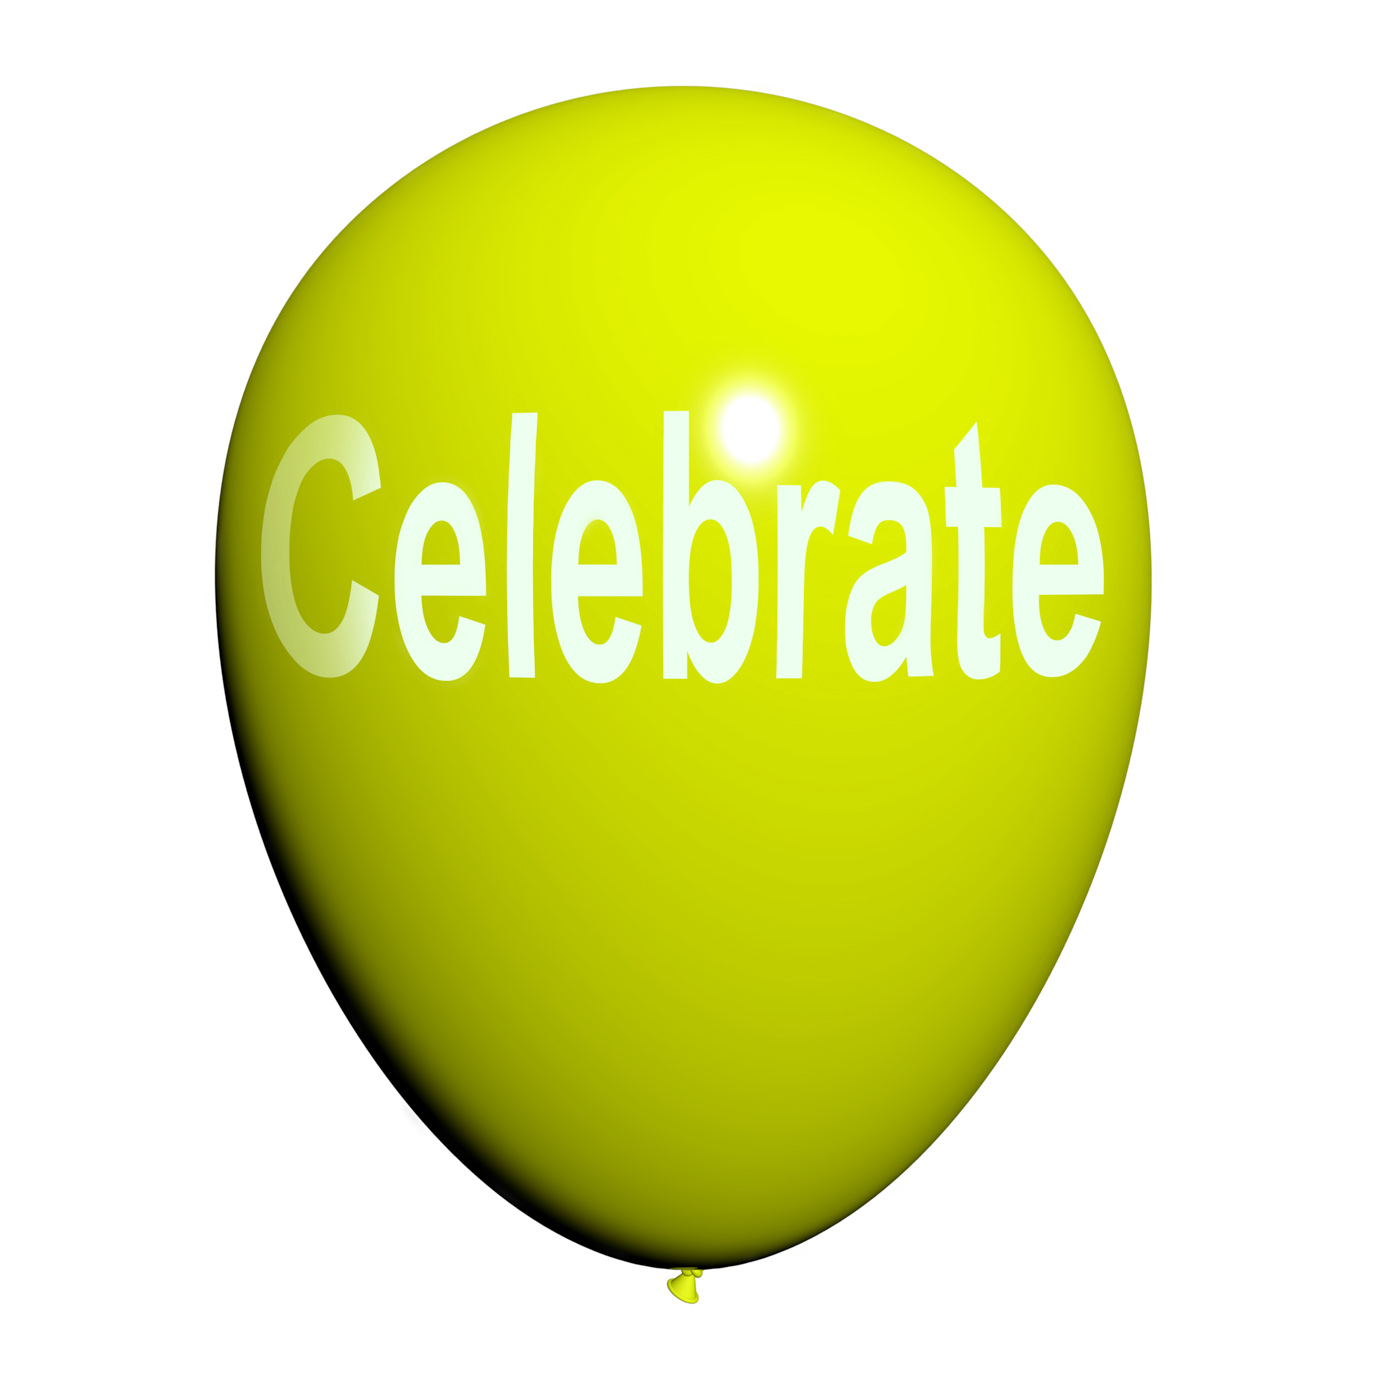 Celebrate balloon means events parties and celebrations photo